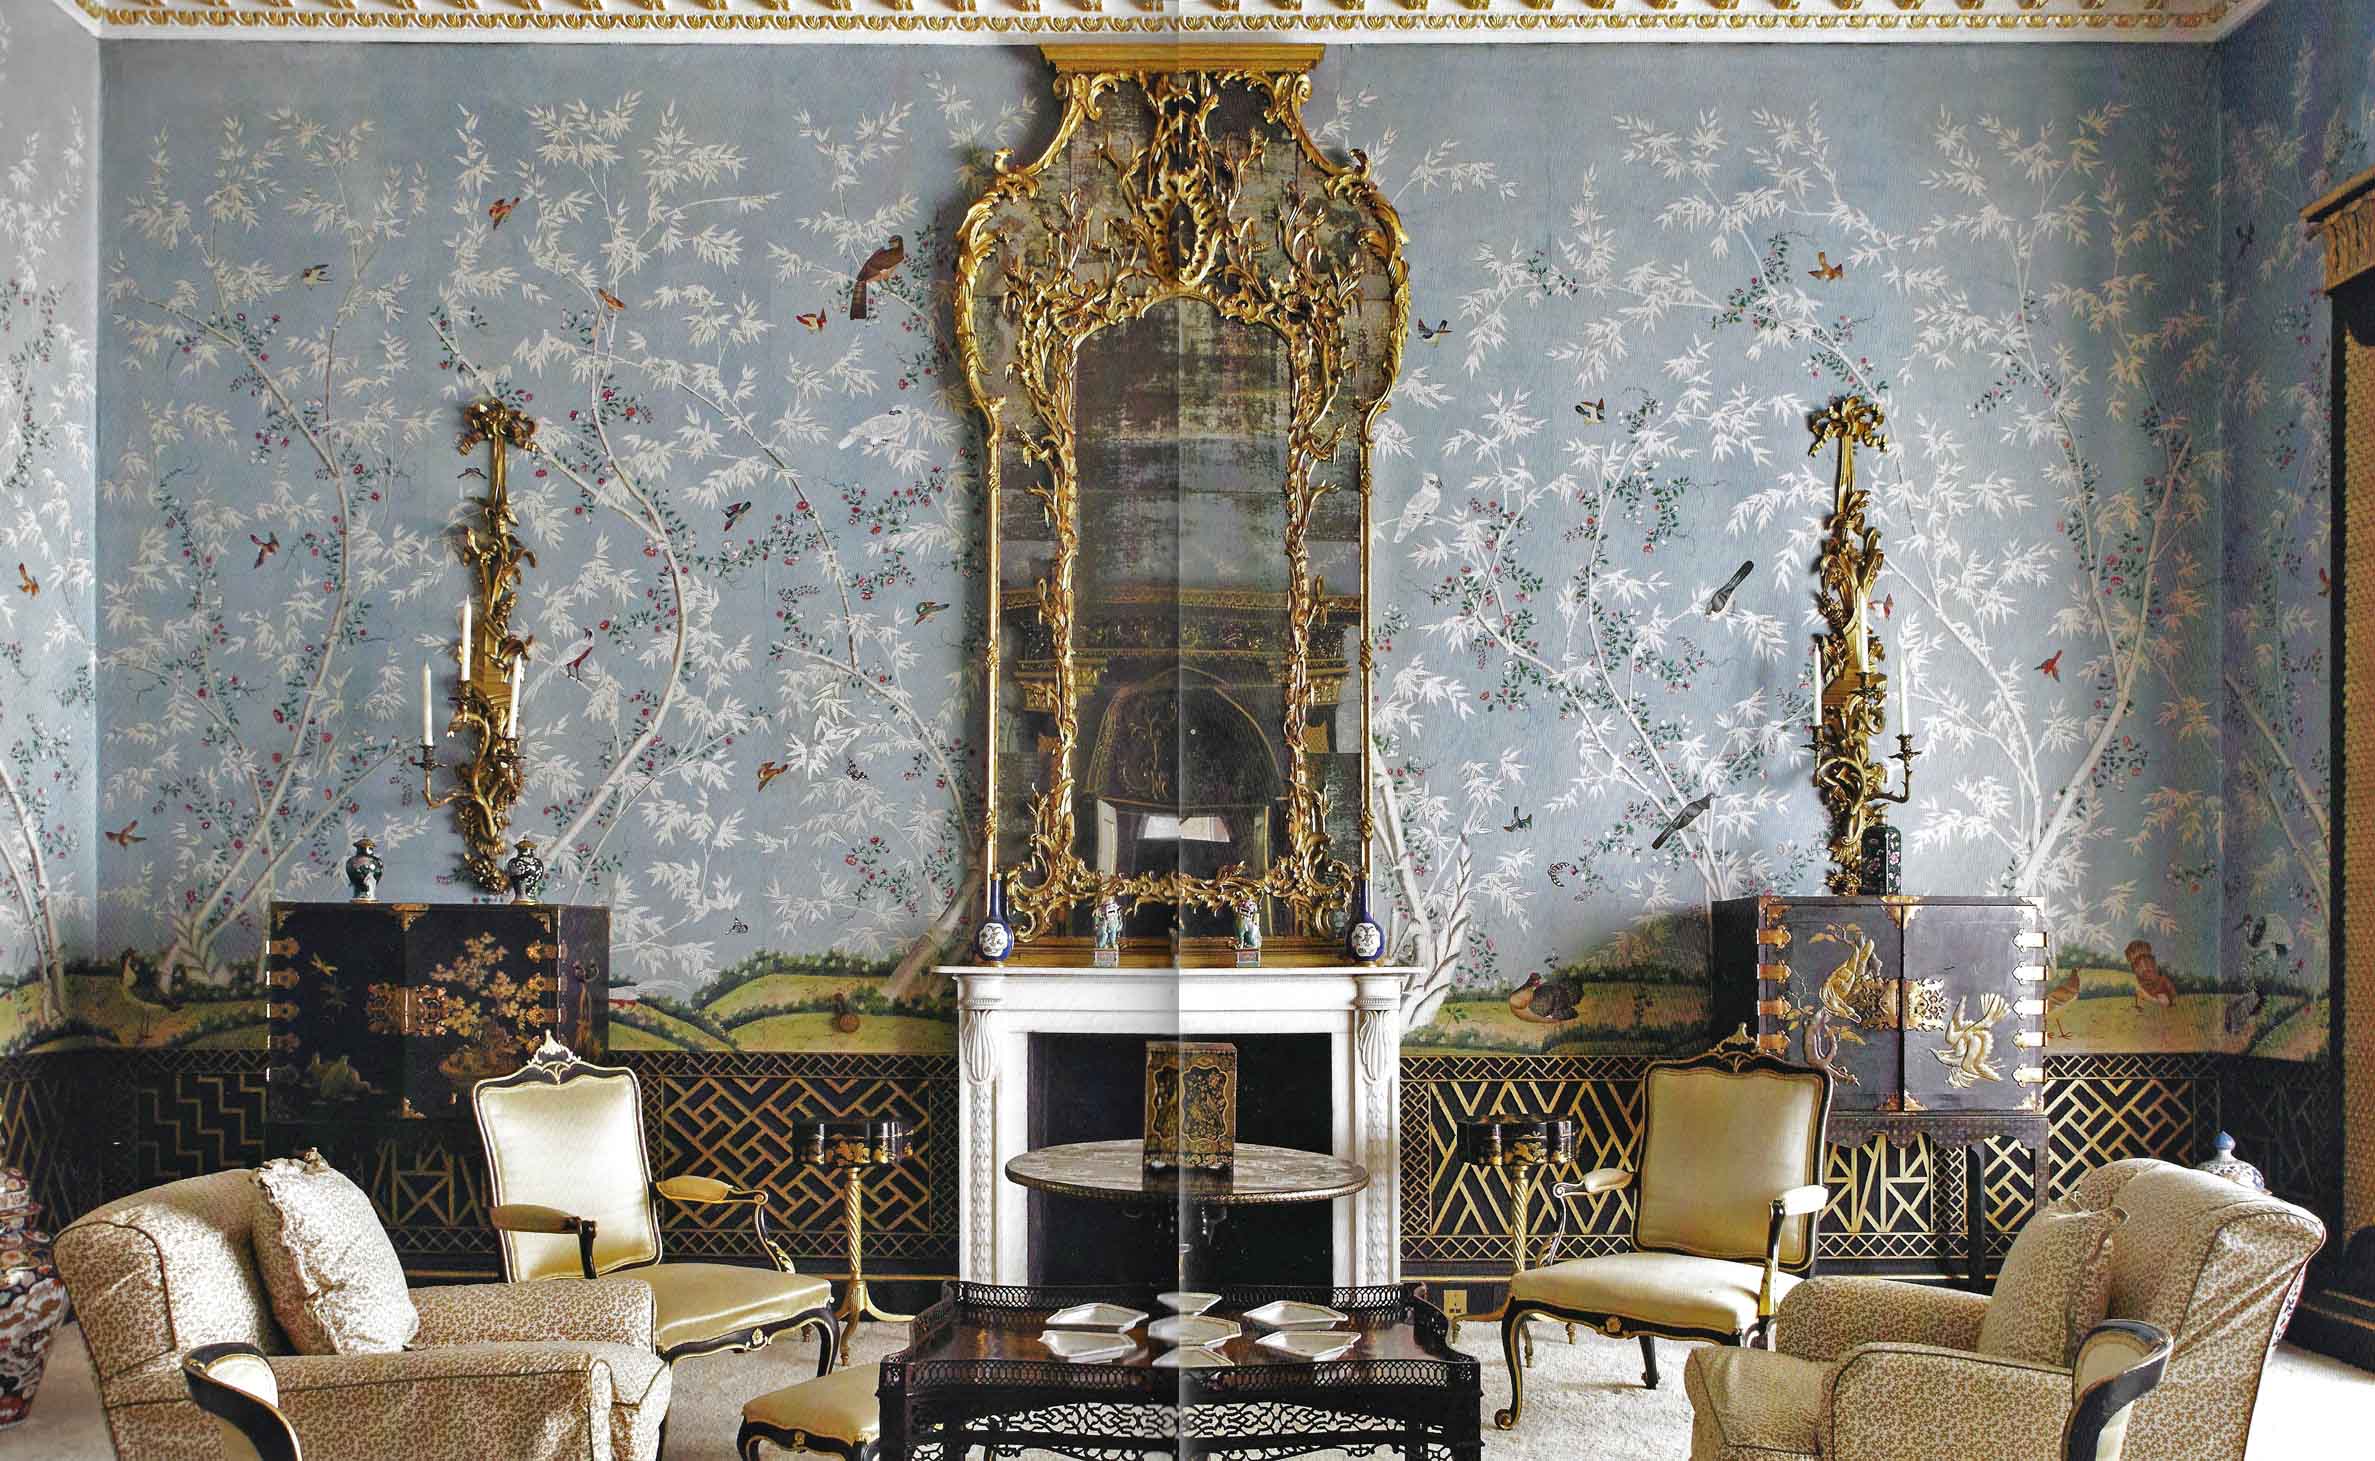 blue-chinoiserie-wallpaper-in-stately-home-with-white-flowers-and-birds-by-emile-de-bruijn